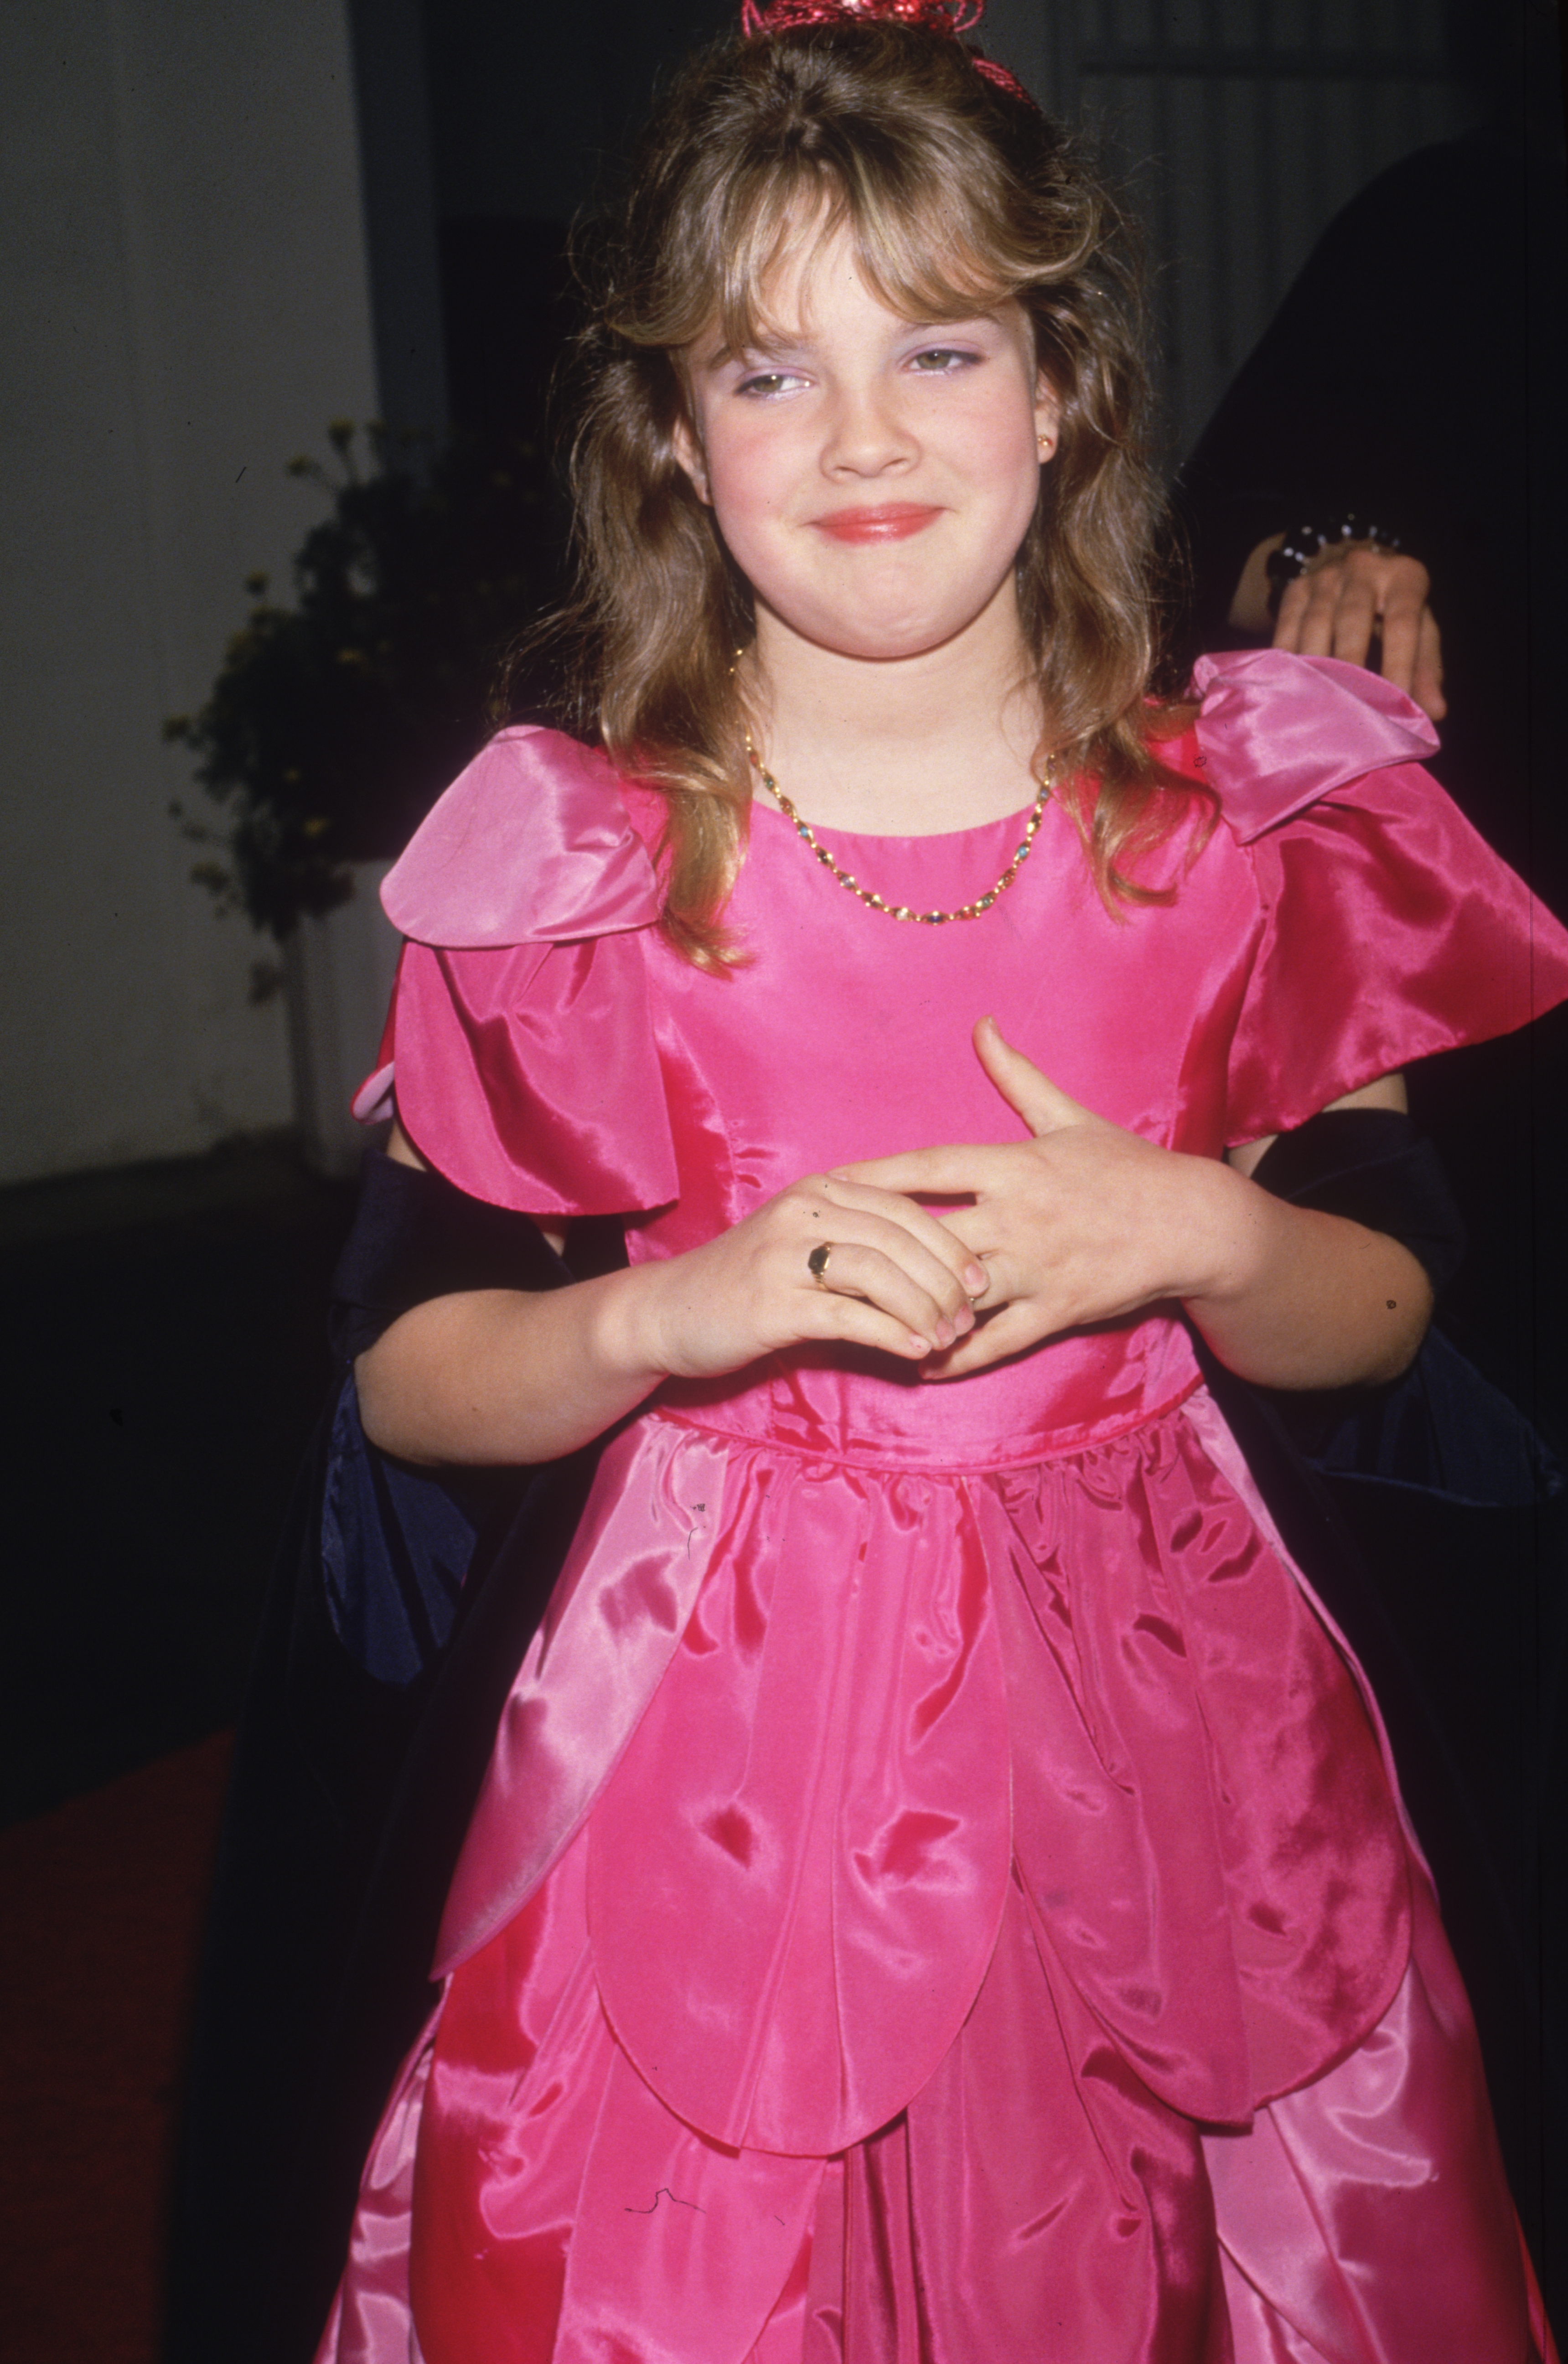 Drew Barrymore, circa 1984 | Source: Getty Images